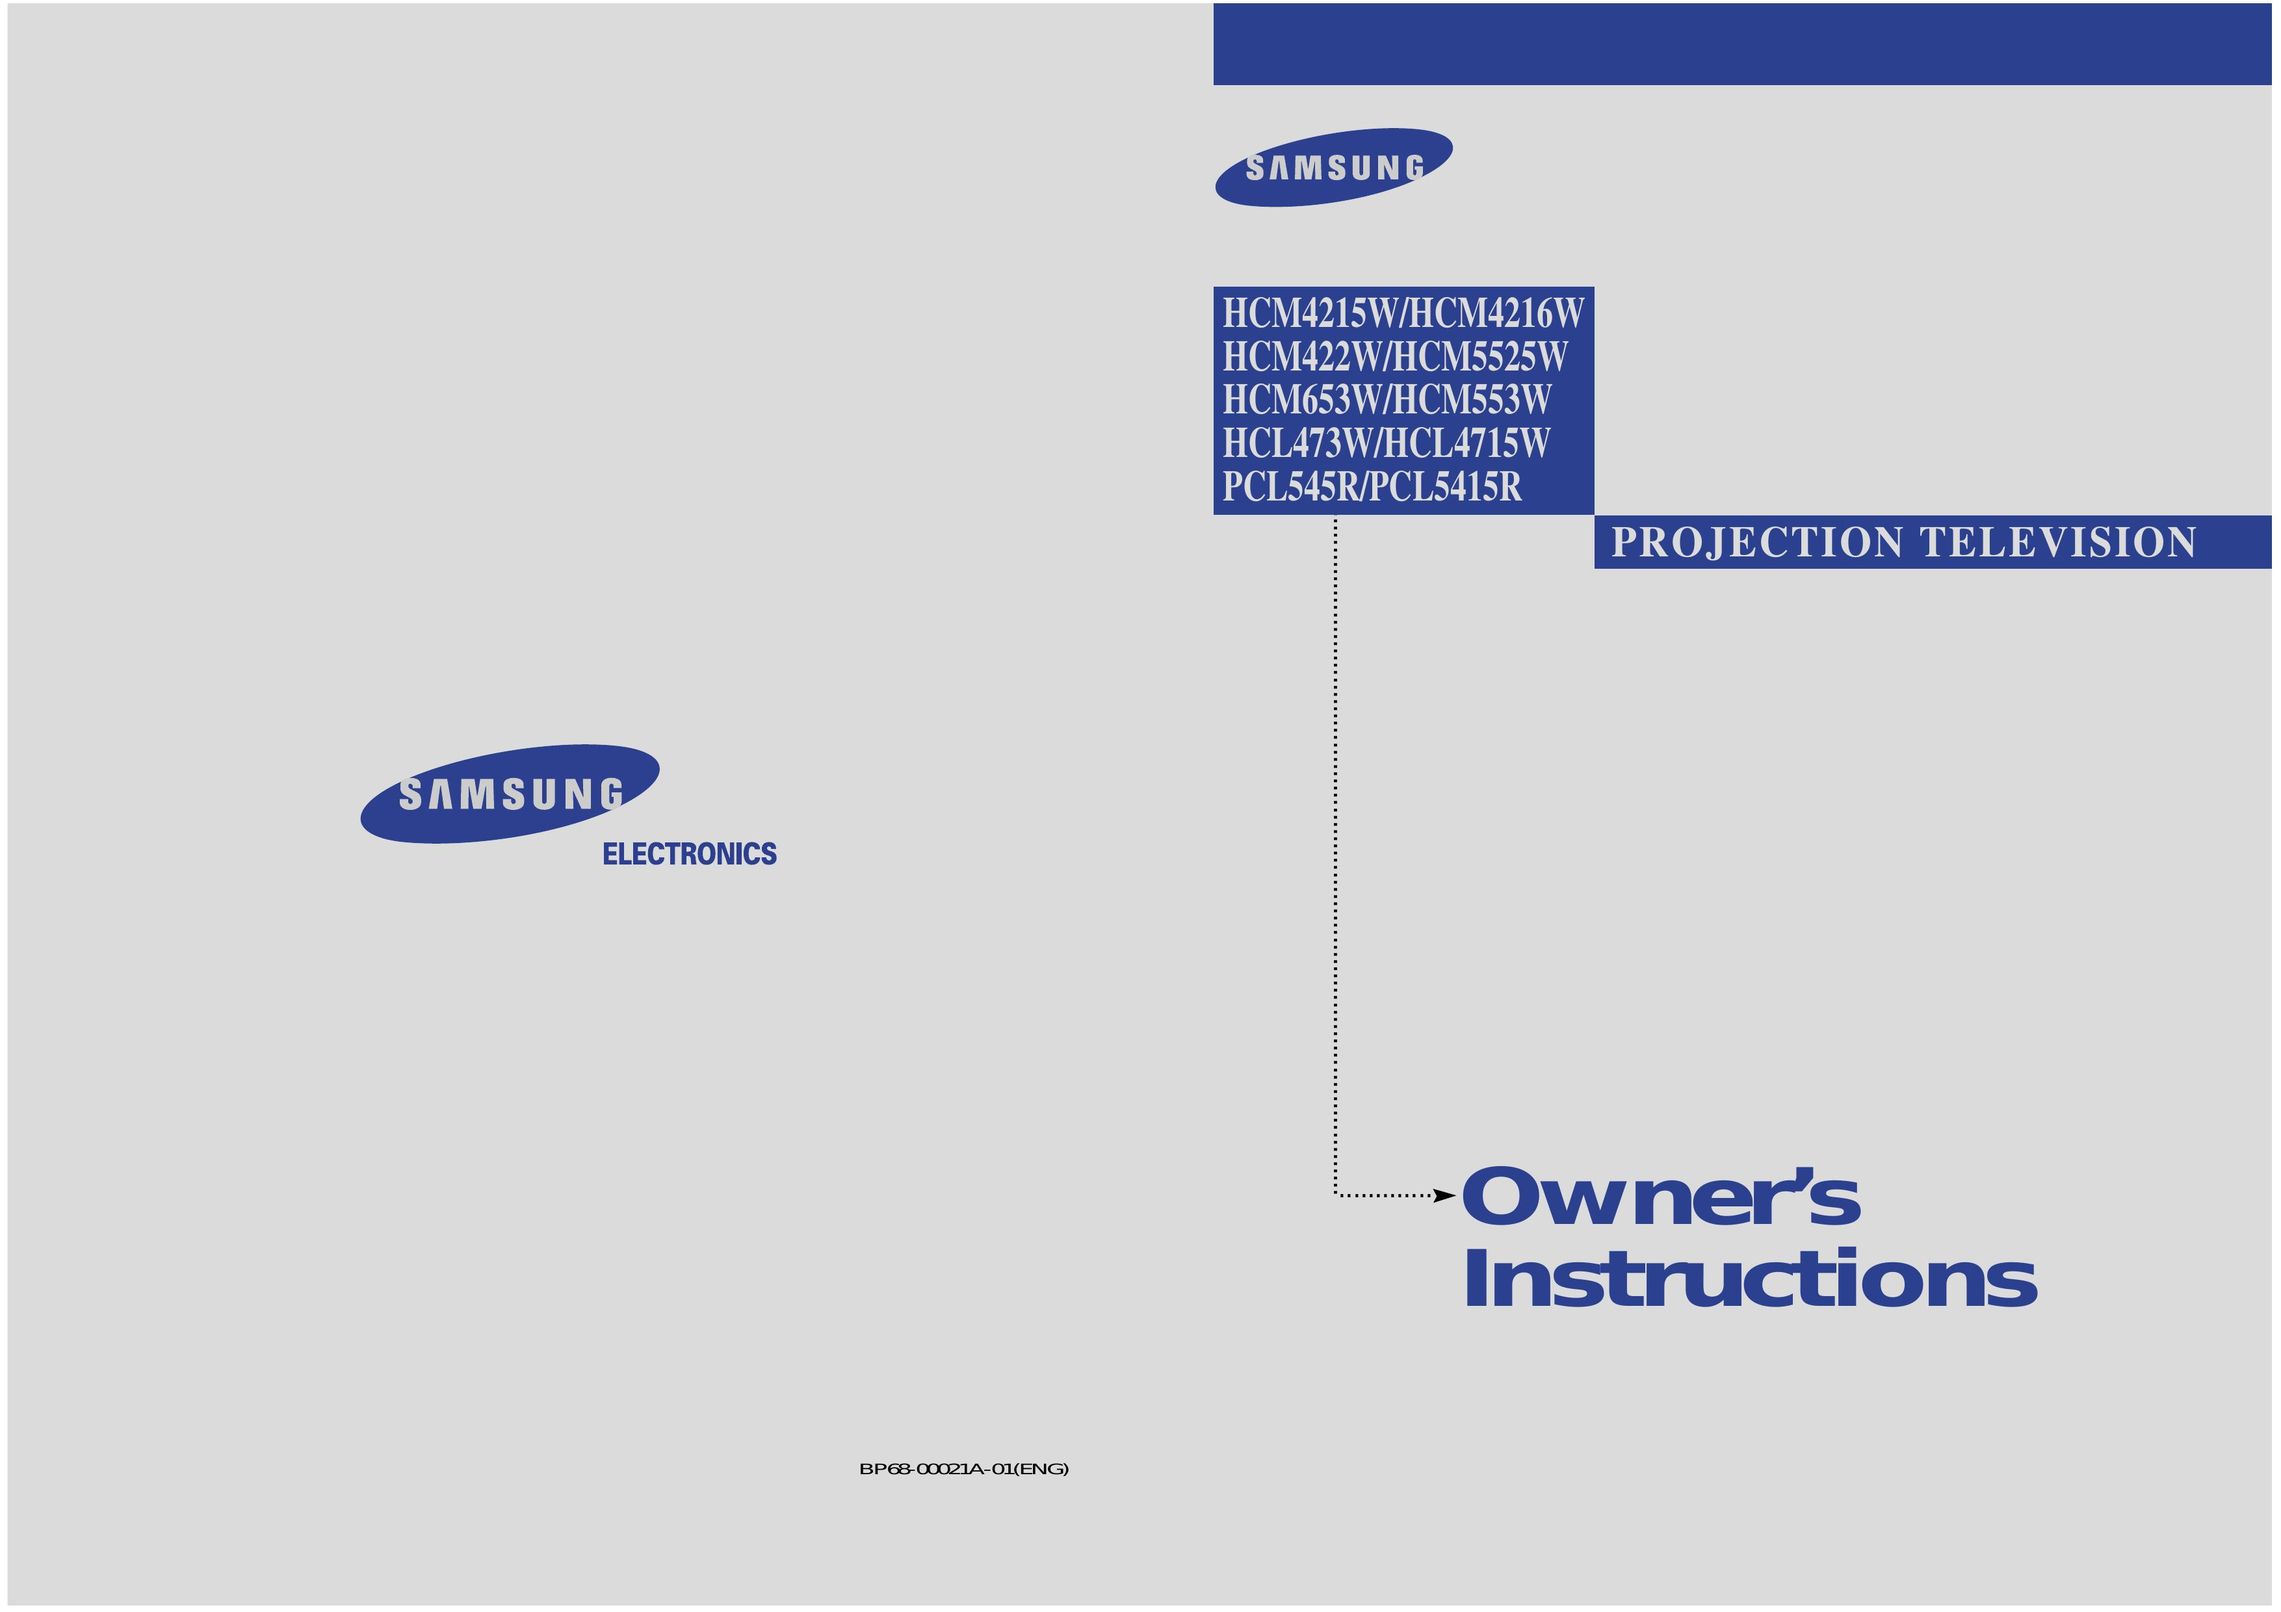 Samsung HCM4215W Projection Television User Manual